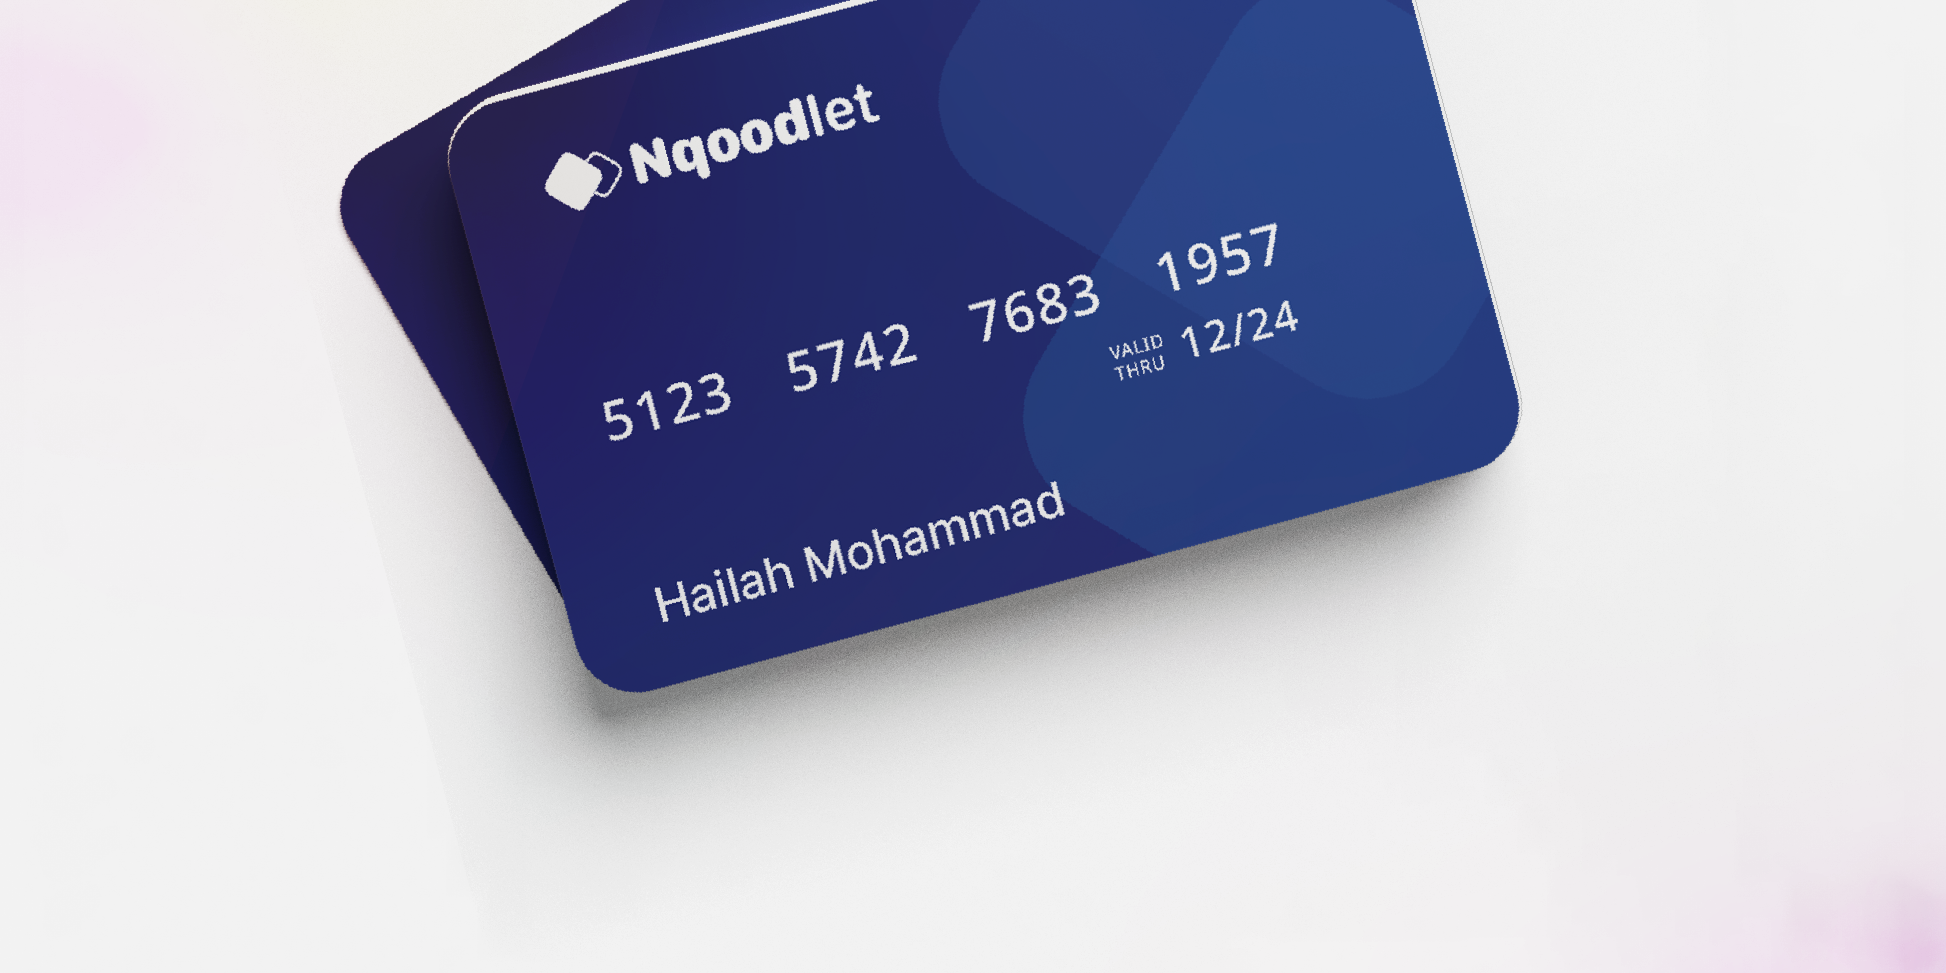 white background and Nqoodlet's card